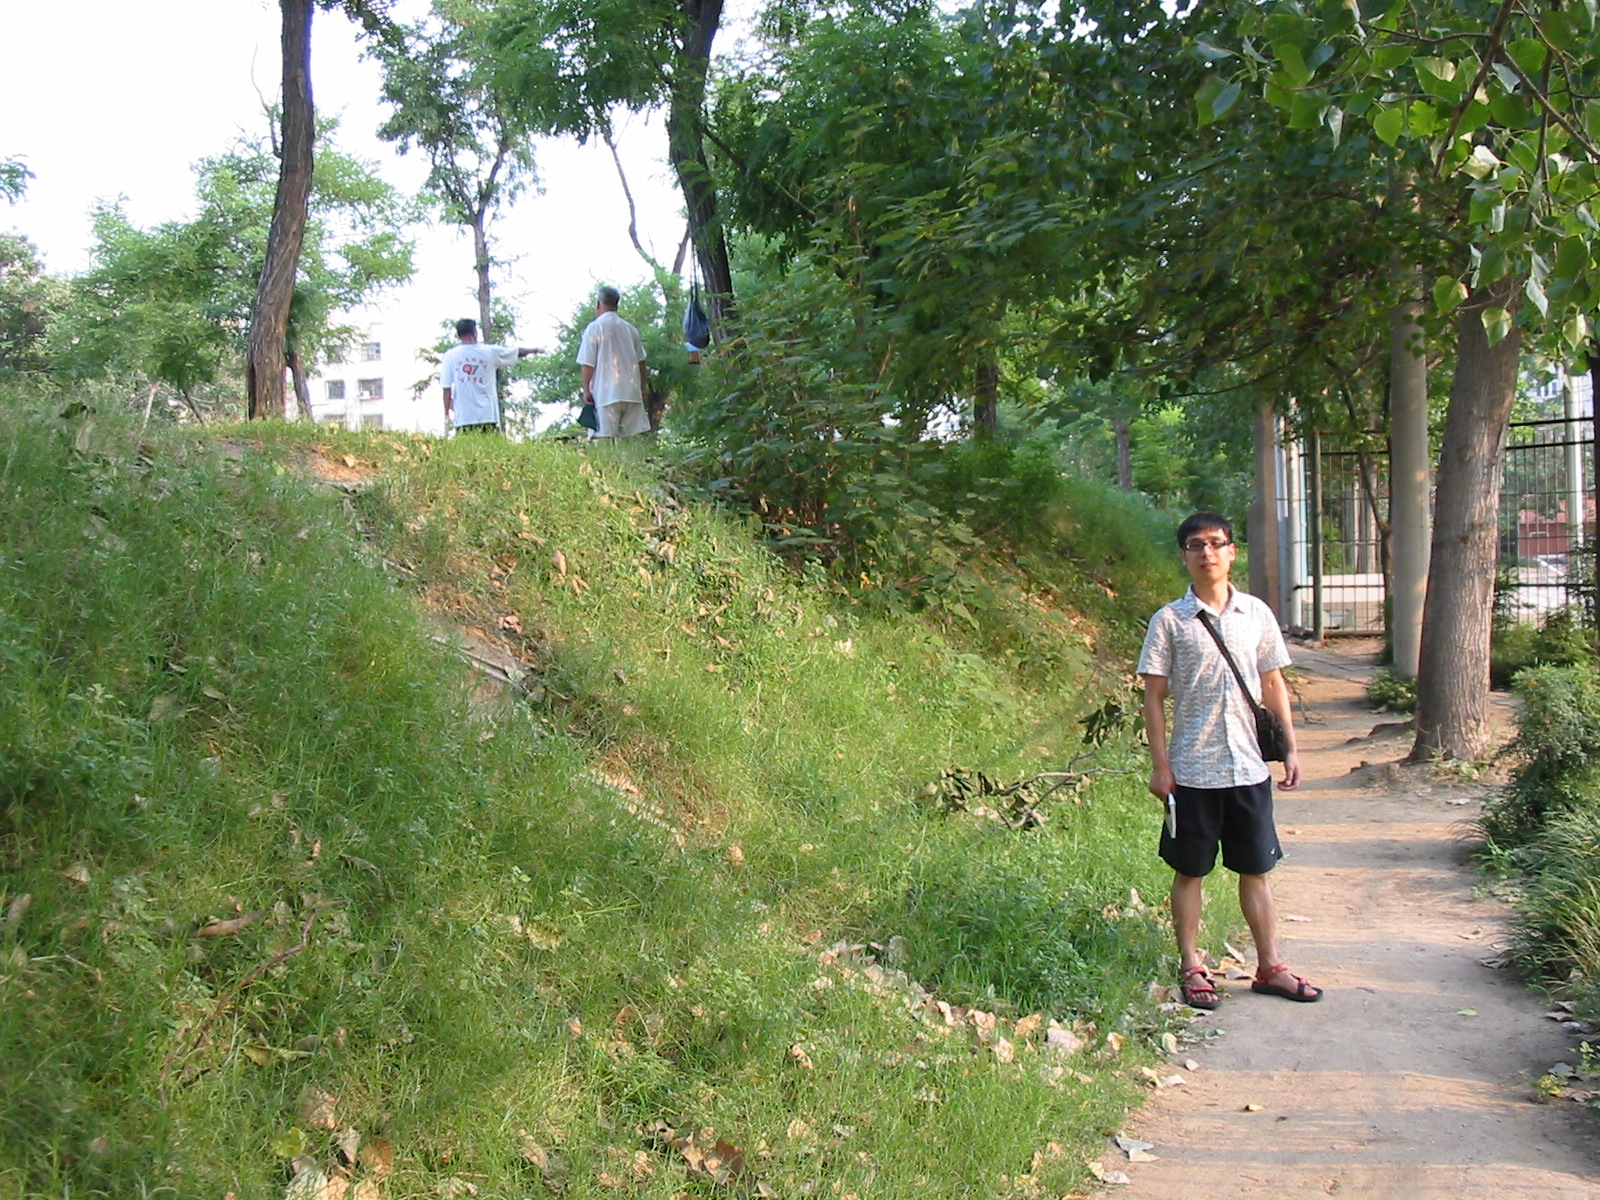 Walking next to the mounds that mark the Shang Dynasty Wall Ruins